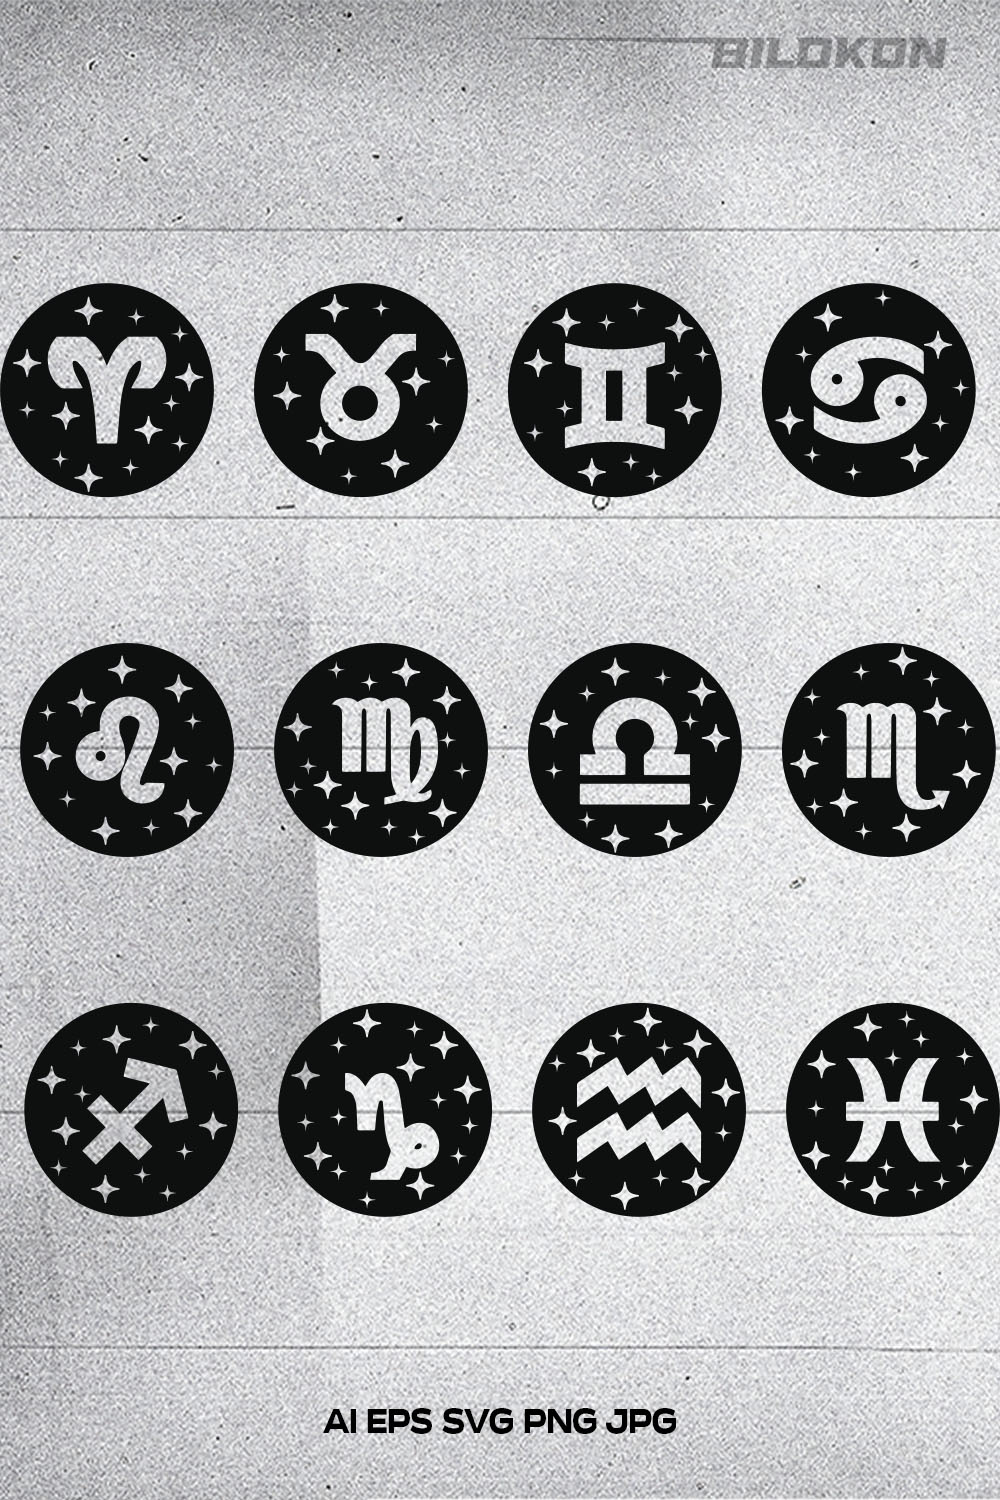 Zodiac horoscope signs SVG Vector pinterest preview image.